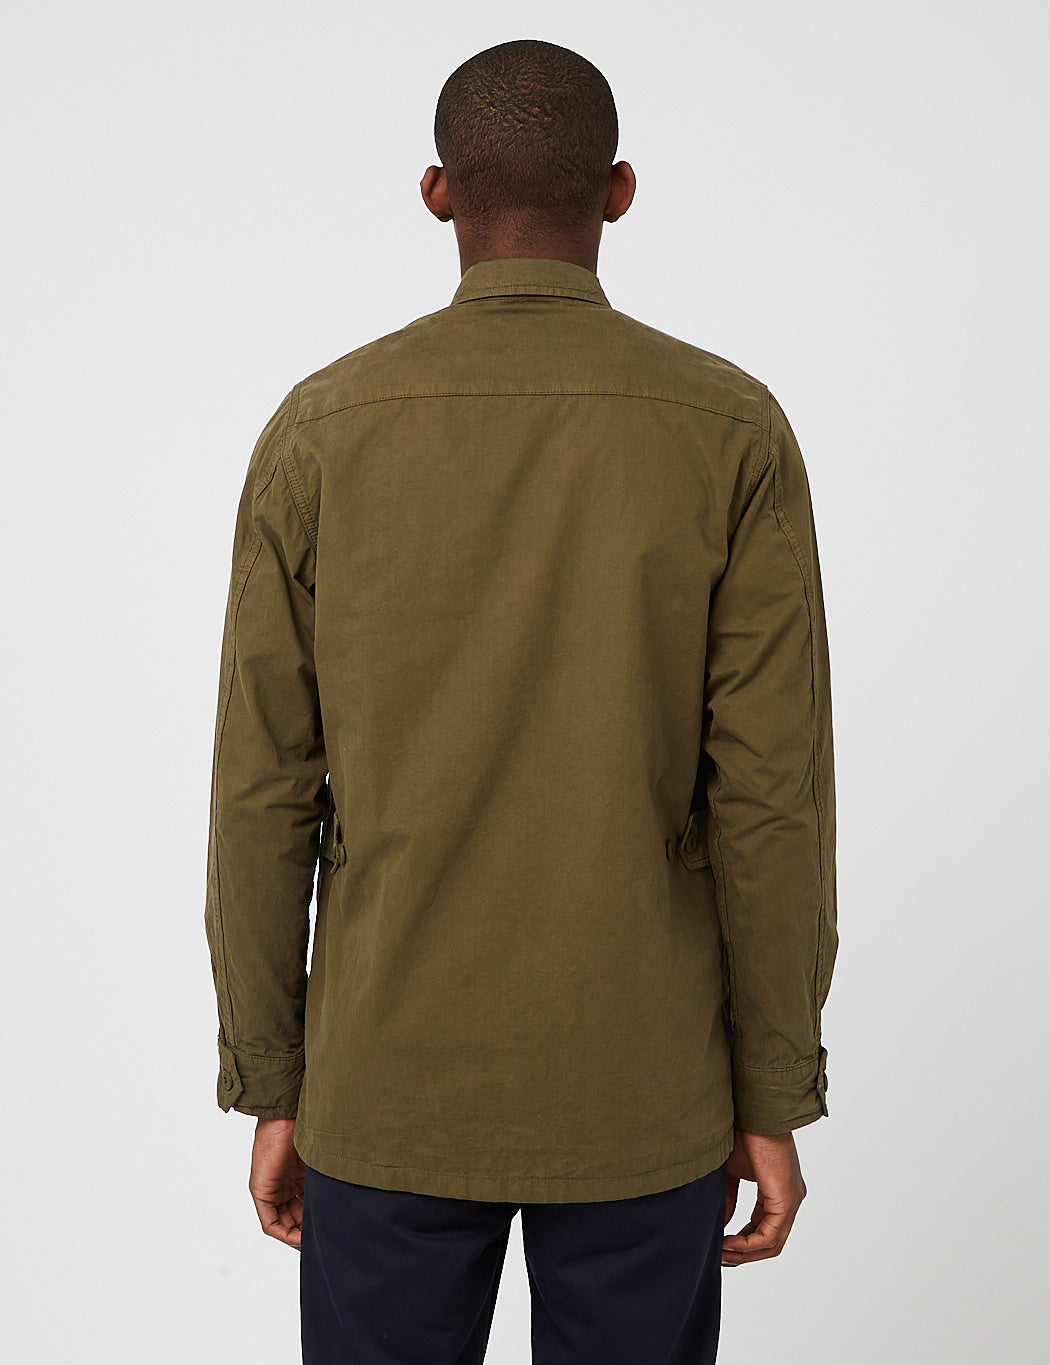 Stan Ray Tropical Jacket - Olive Poplin Green | URBAN EXCESS.